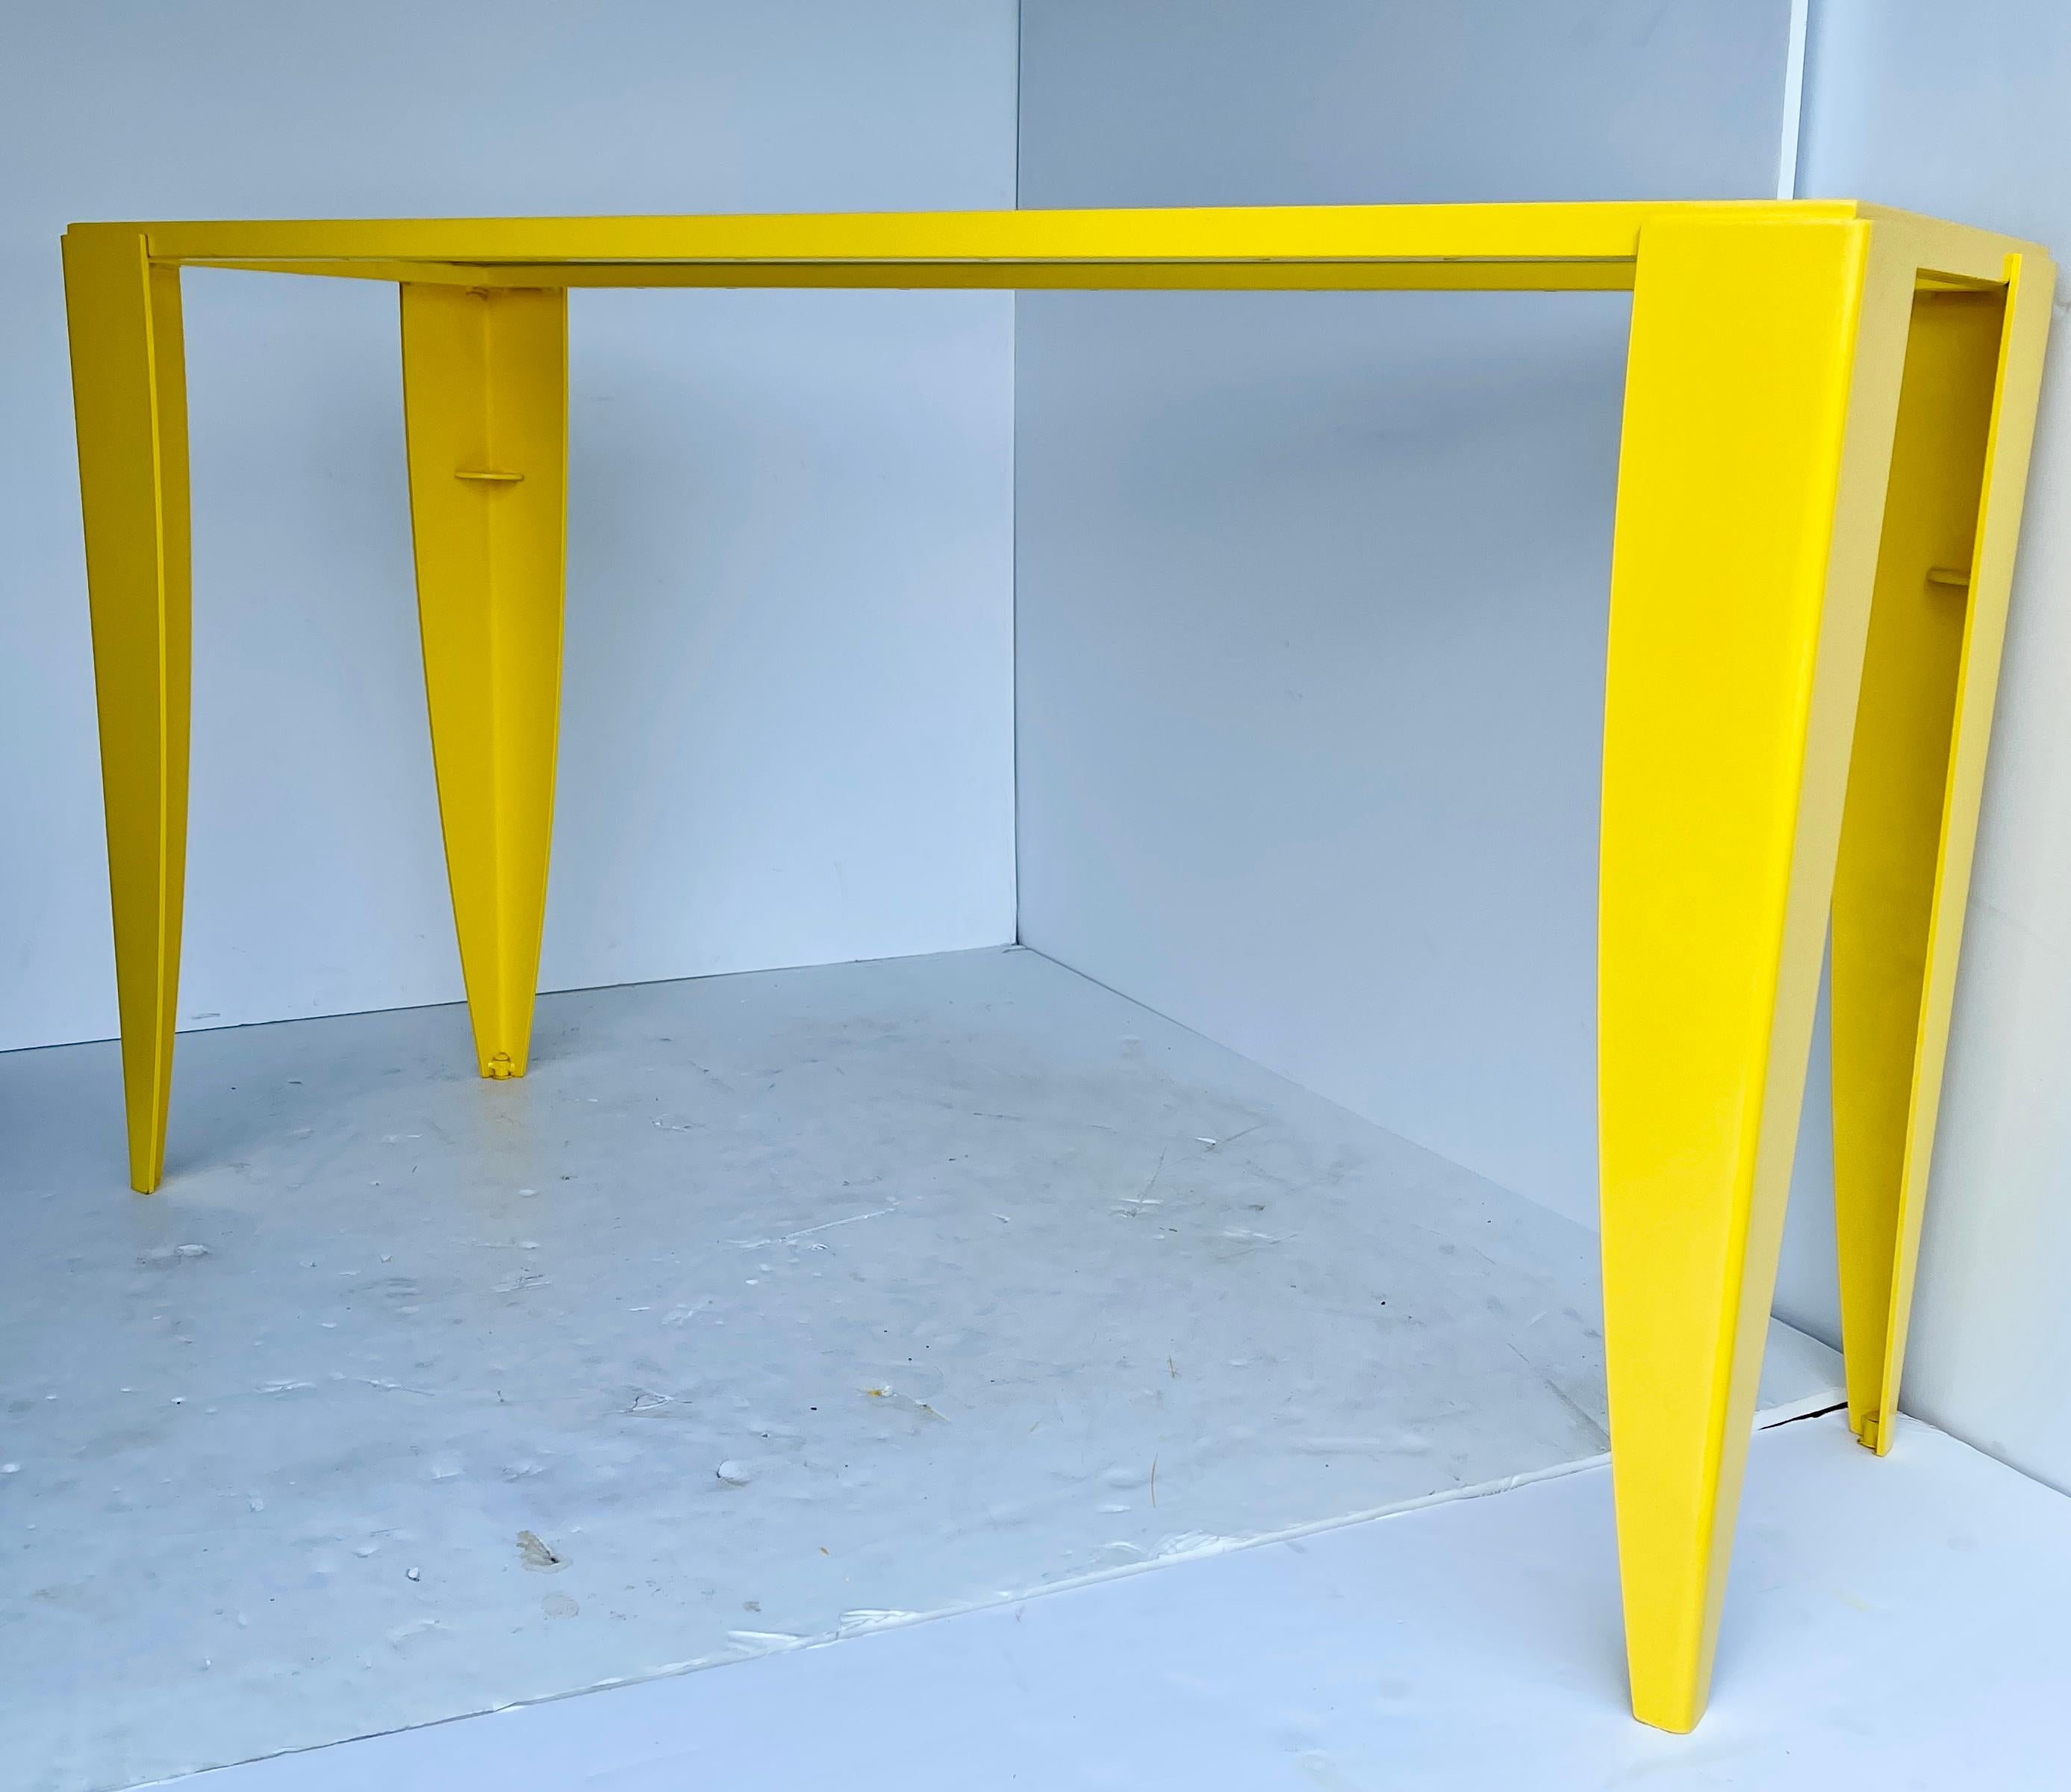 Mid-Century Modern powder coated bright sunshine yellow console table with glass top.
This bold Italian steel console table is bright as sunshine. The handcrafted glass top has horizontal steel striping, adding another point of interest to this